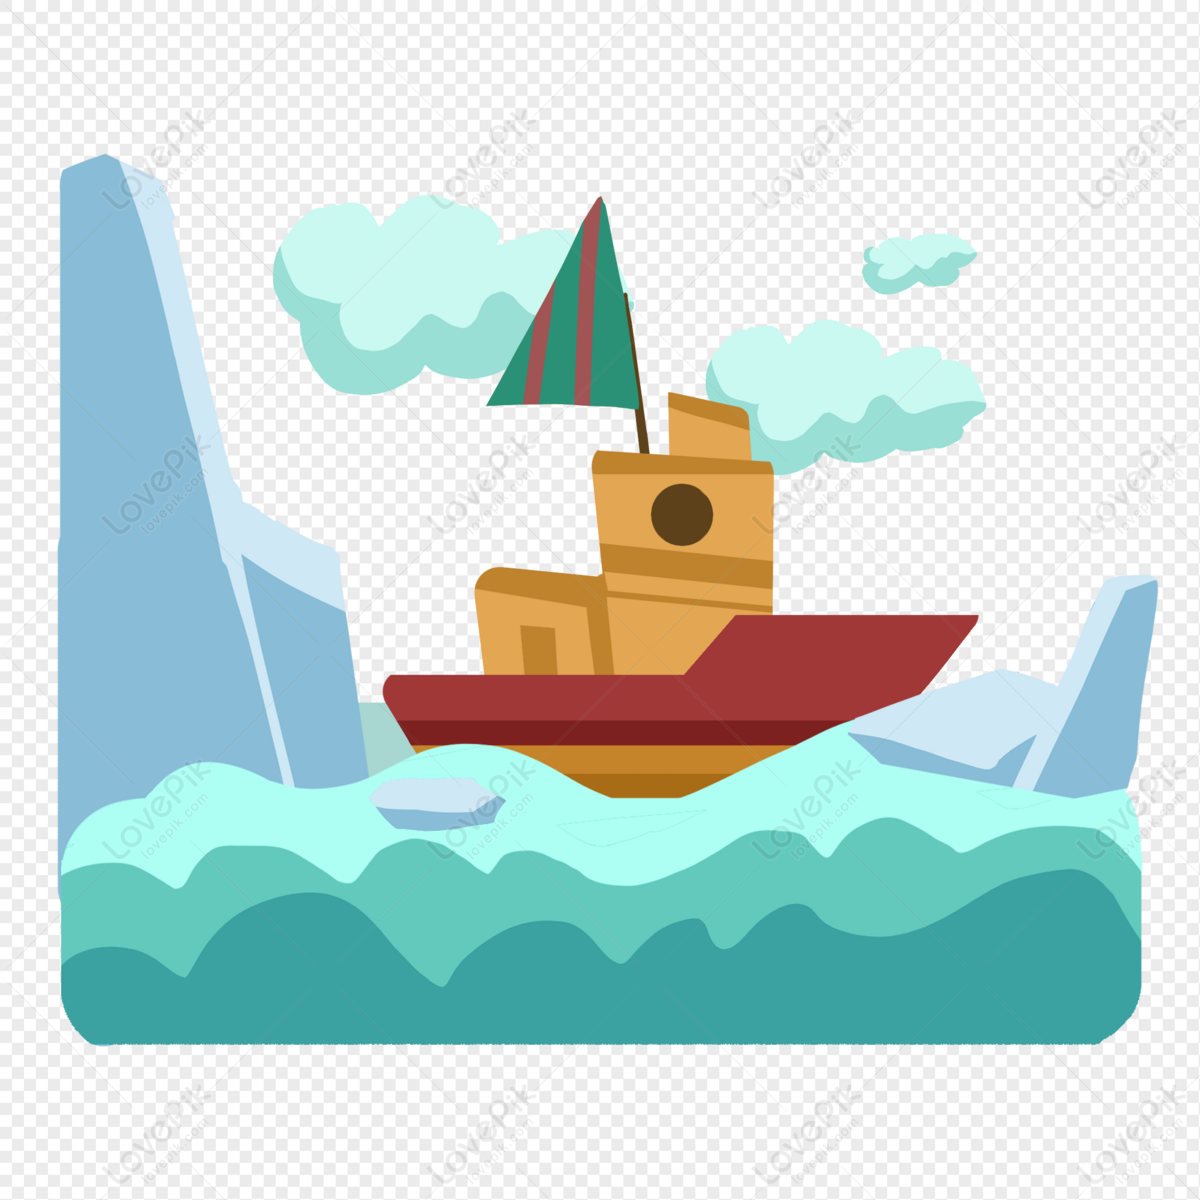 Sea Yacht Free PNG And Clipart Image For Free Download - Lovepik | 401346719